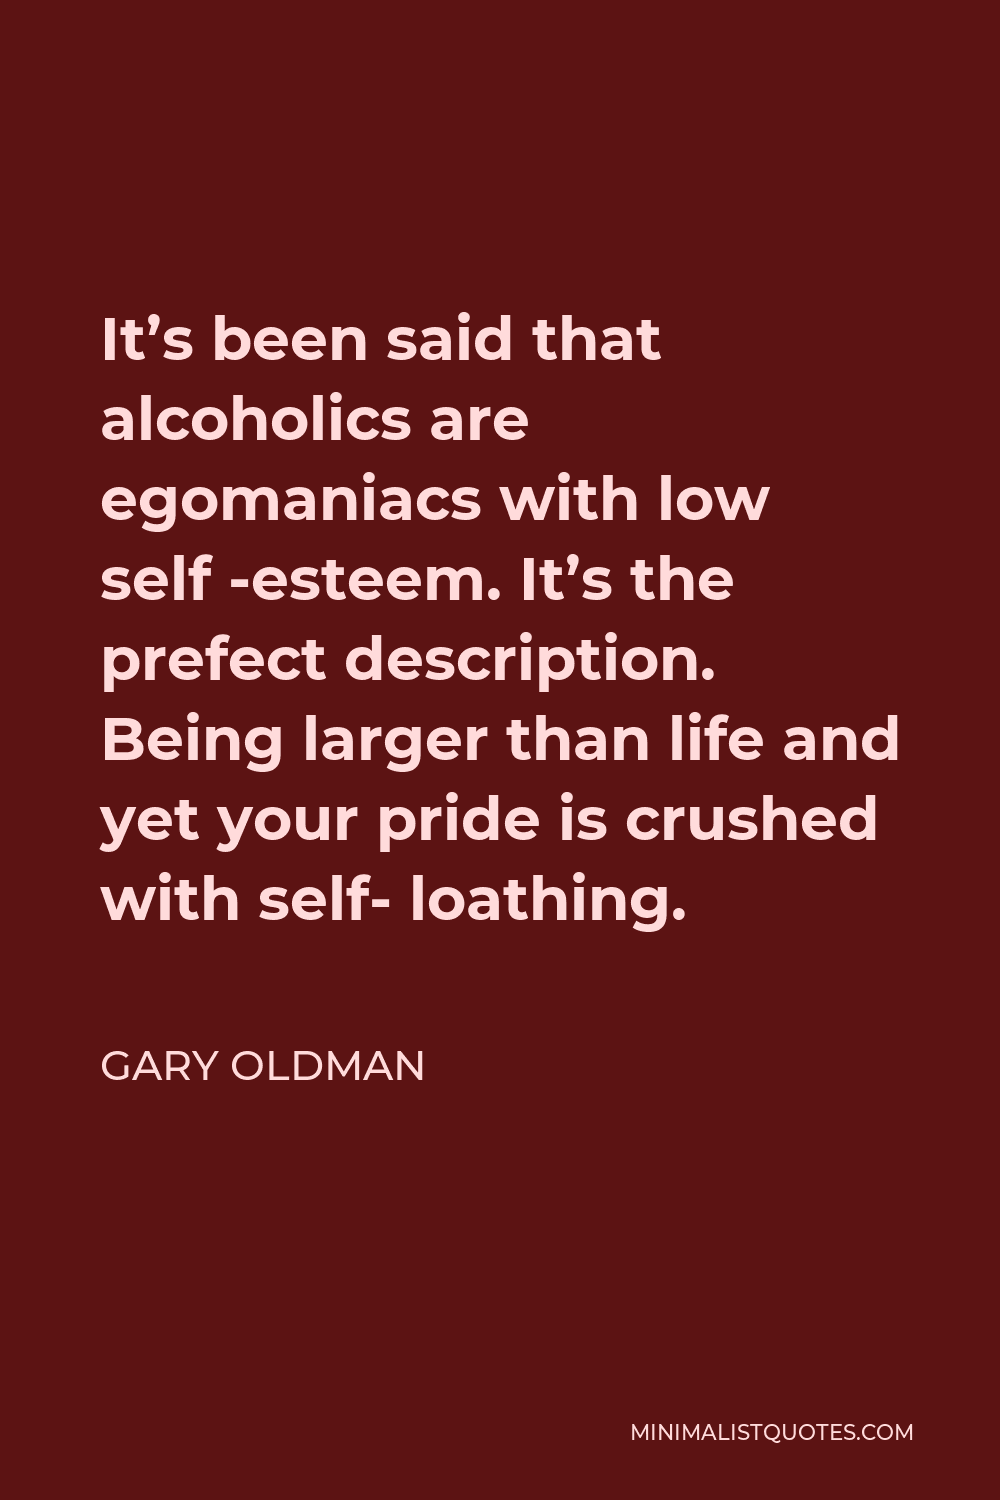 Gary Oldman Quote - It’s been said that alcoholics are egomaniacs with low self -esteem. It’s the prefect description. Being larger than life and yet your pride is crushed with self- loathing.